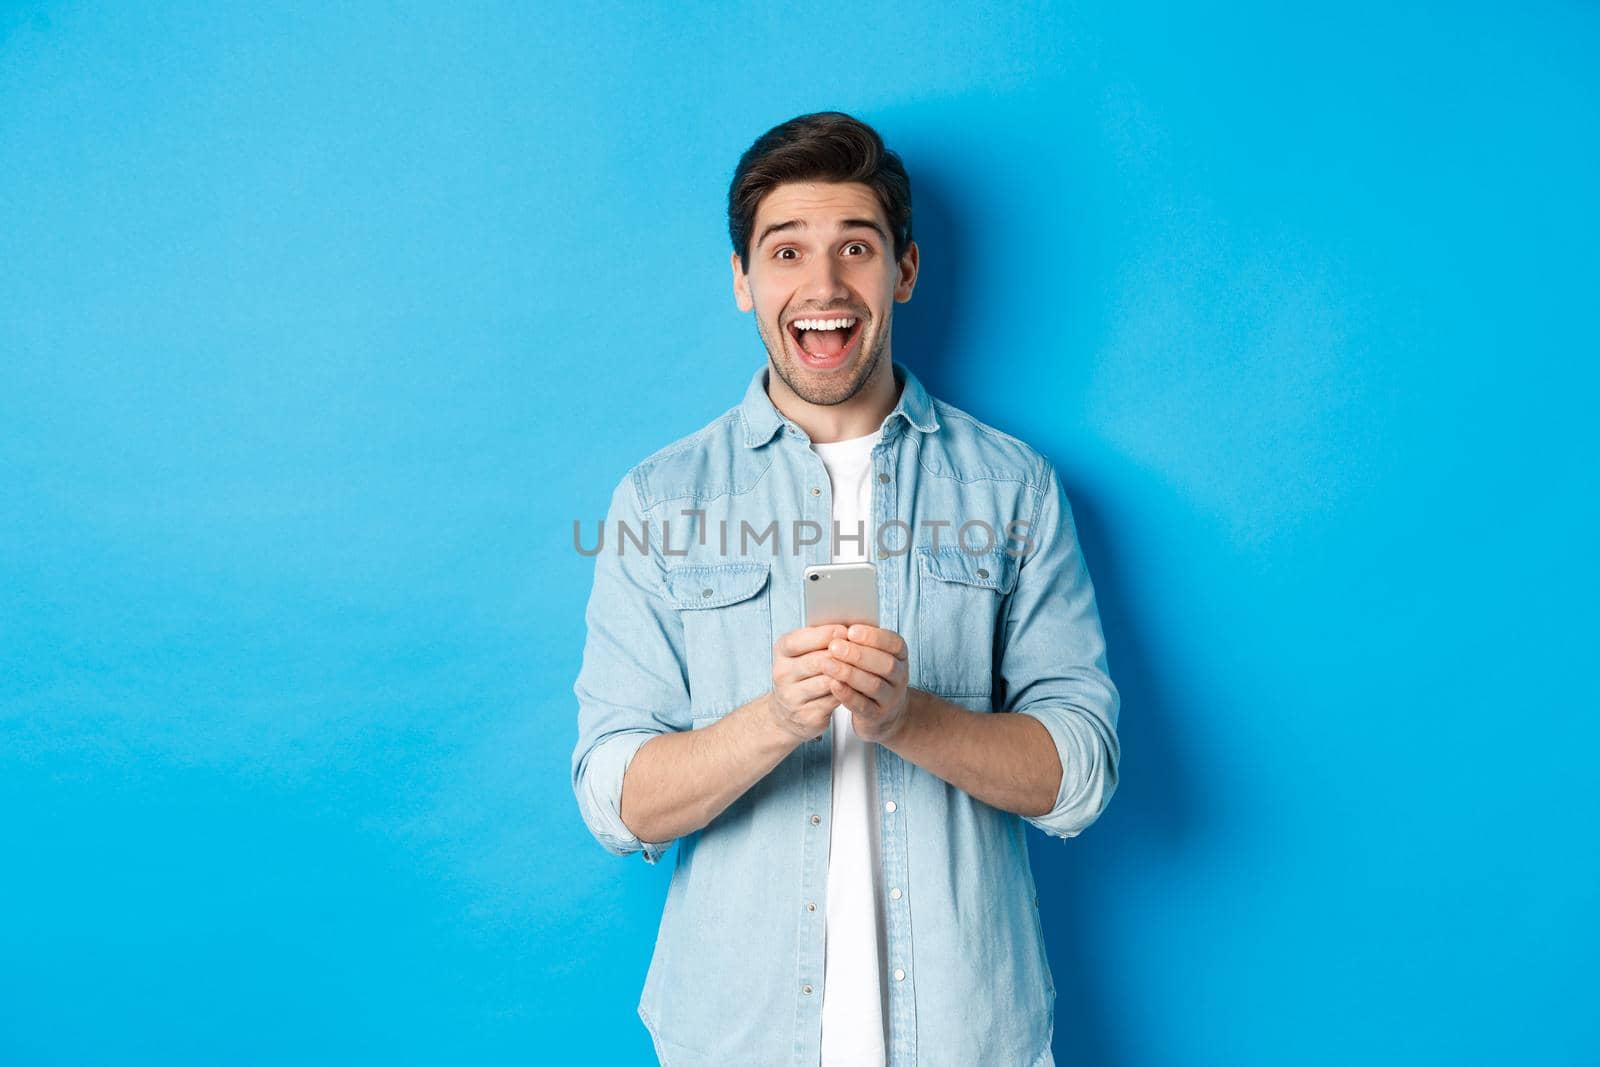 Surprised and happy man winning something online, holding smartphone and rejoicing, standing against blue background.